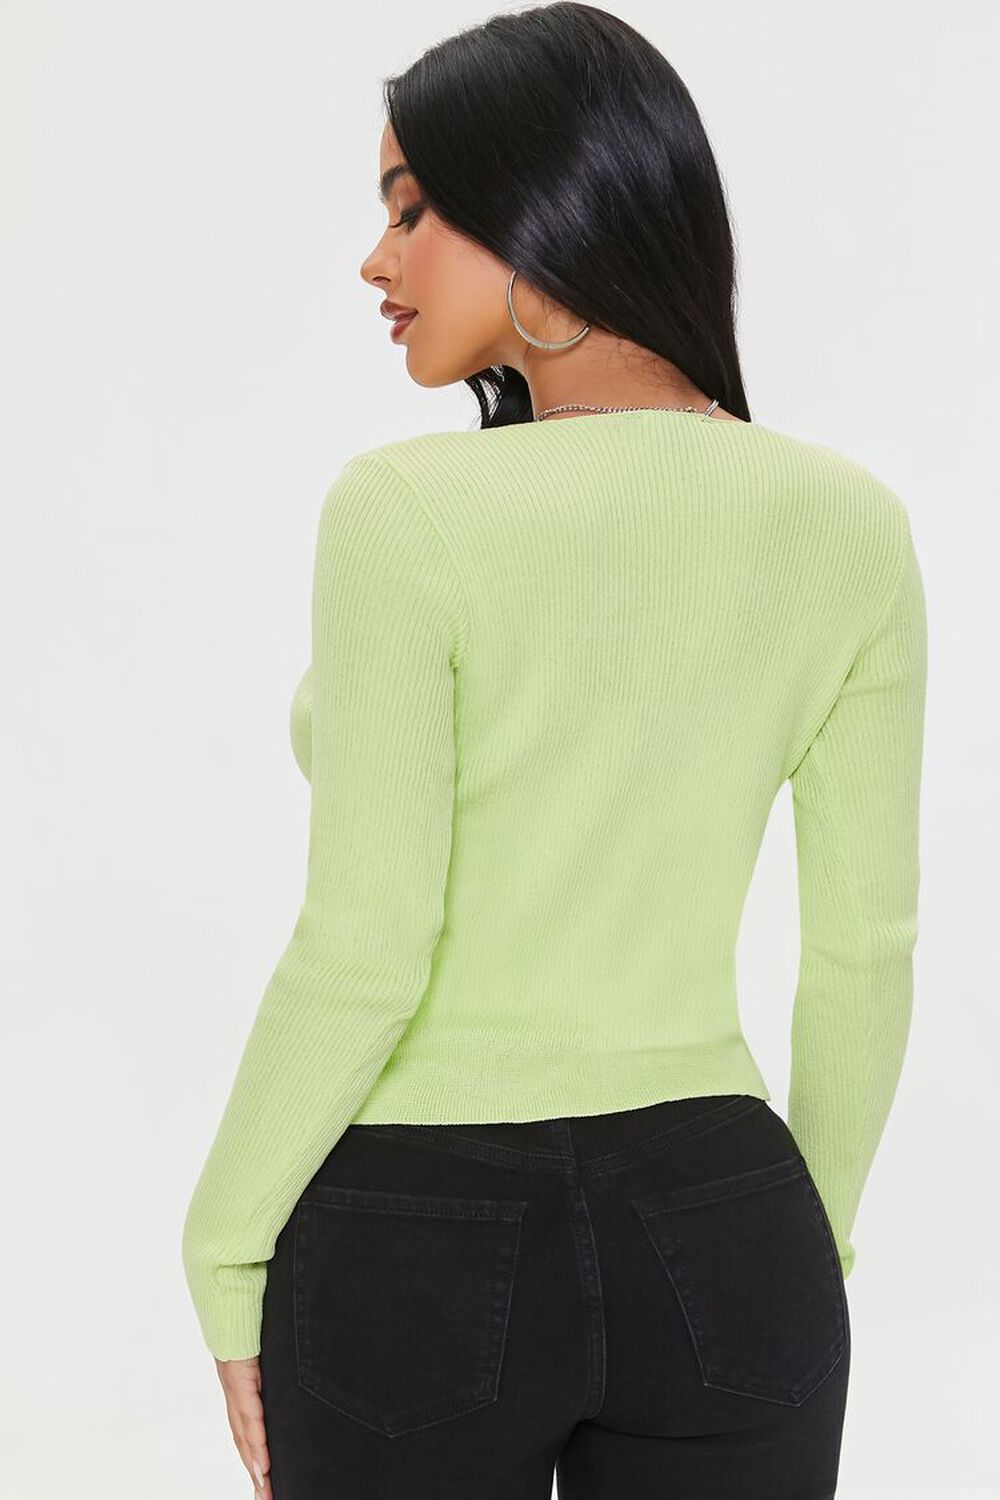 WILD LIME Ribbed Curb Chain Sweater, image 3